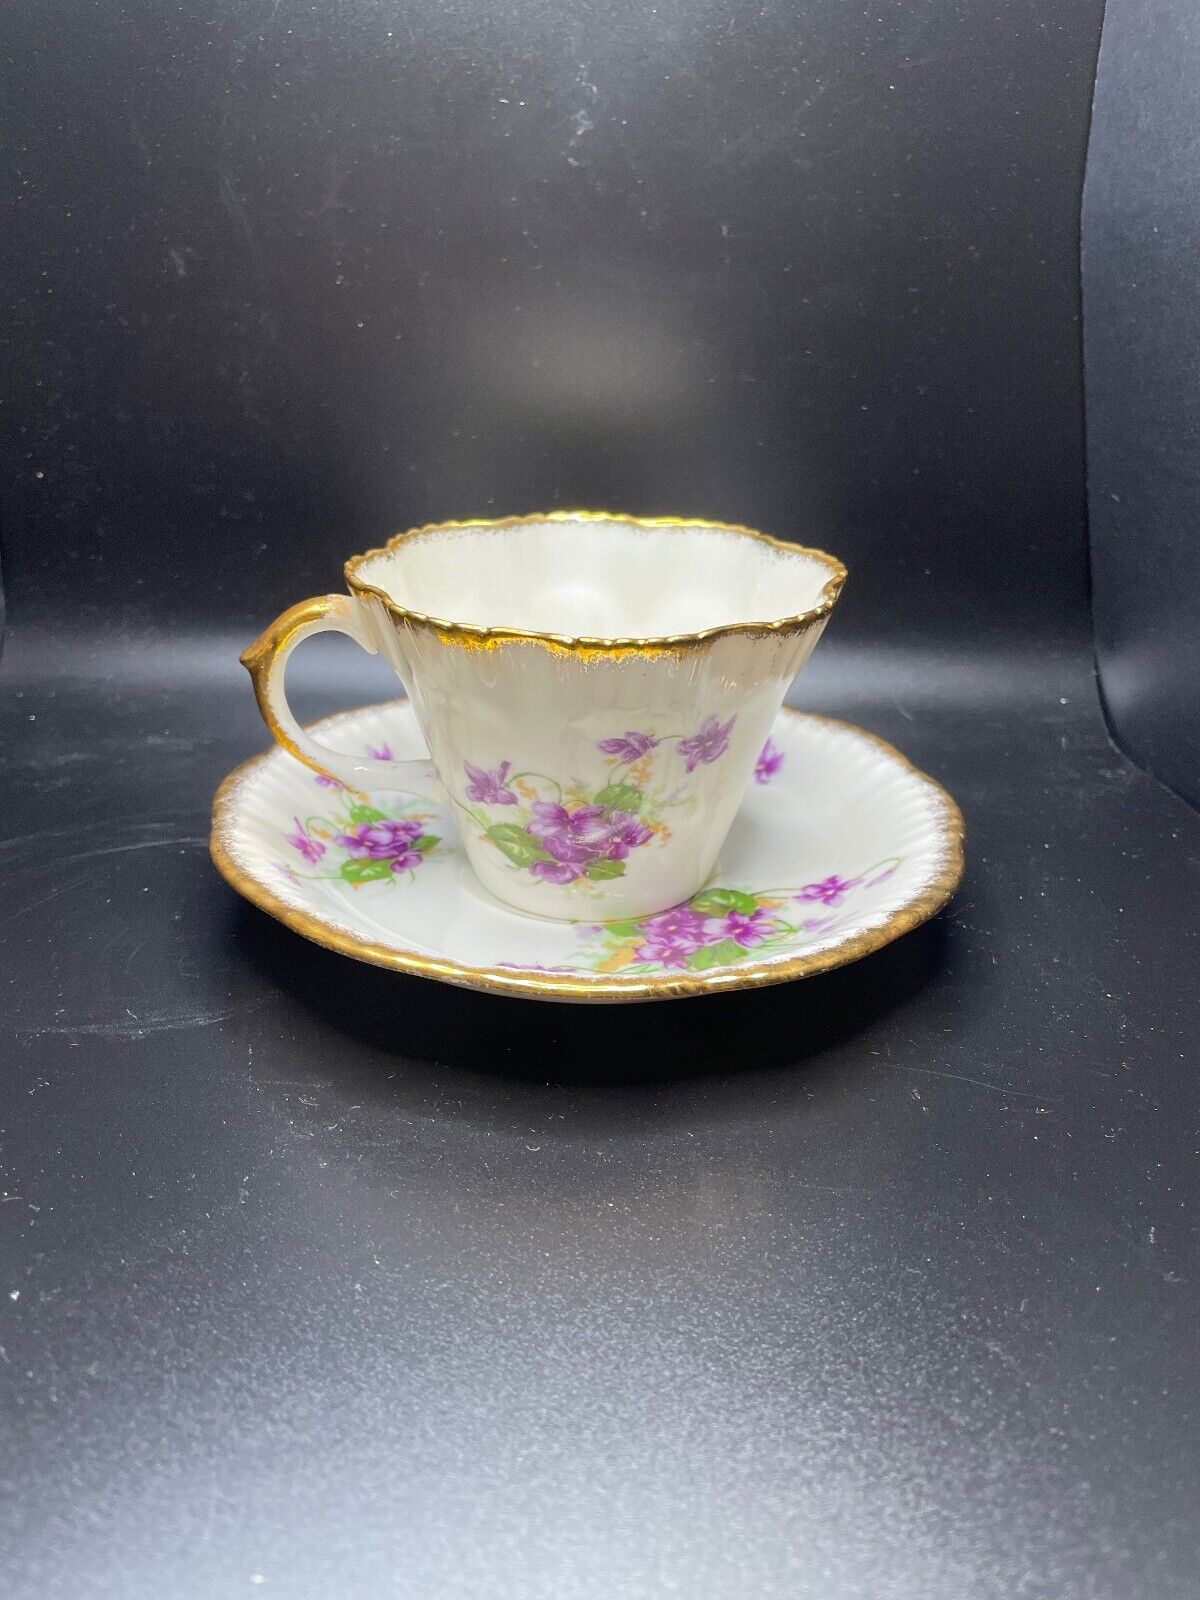 VIOLETS: February Birth Flower -Vintage (1920-40's) Salisbury cup and saucer